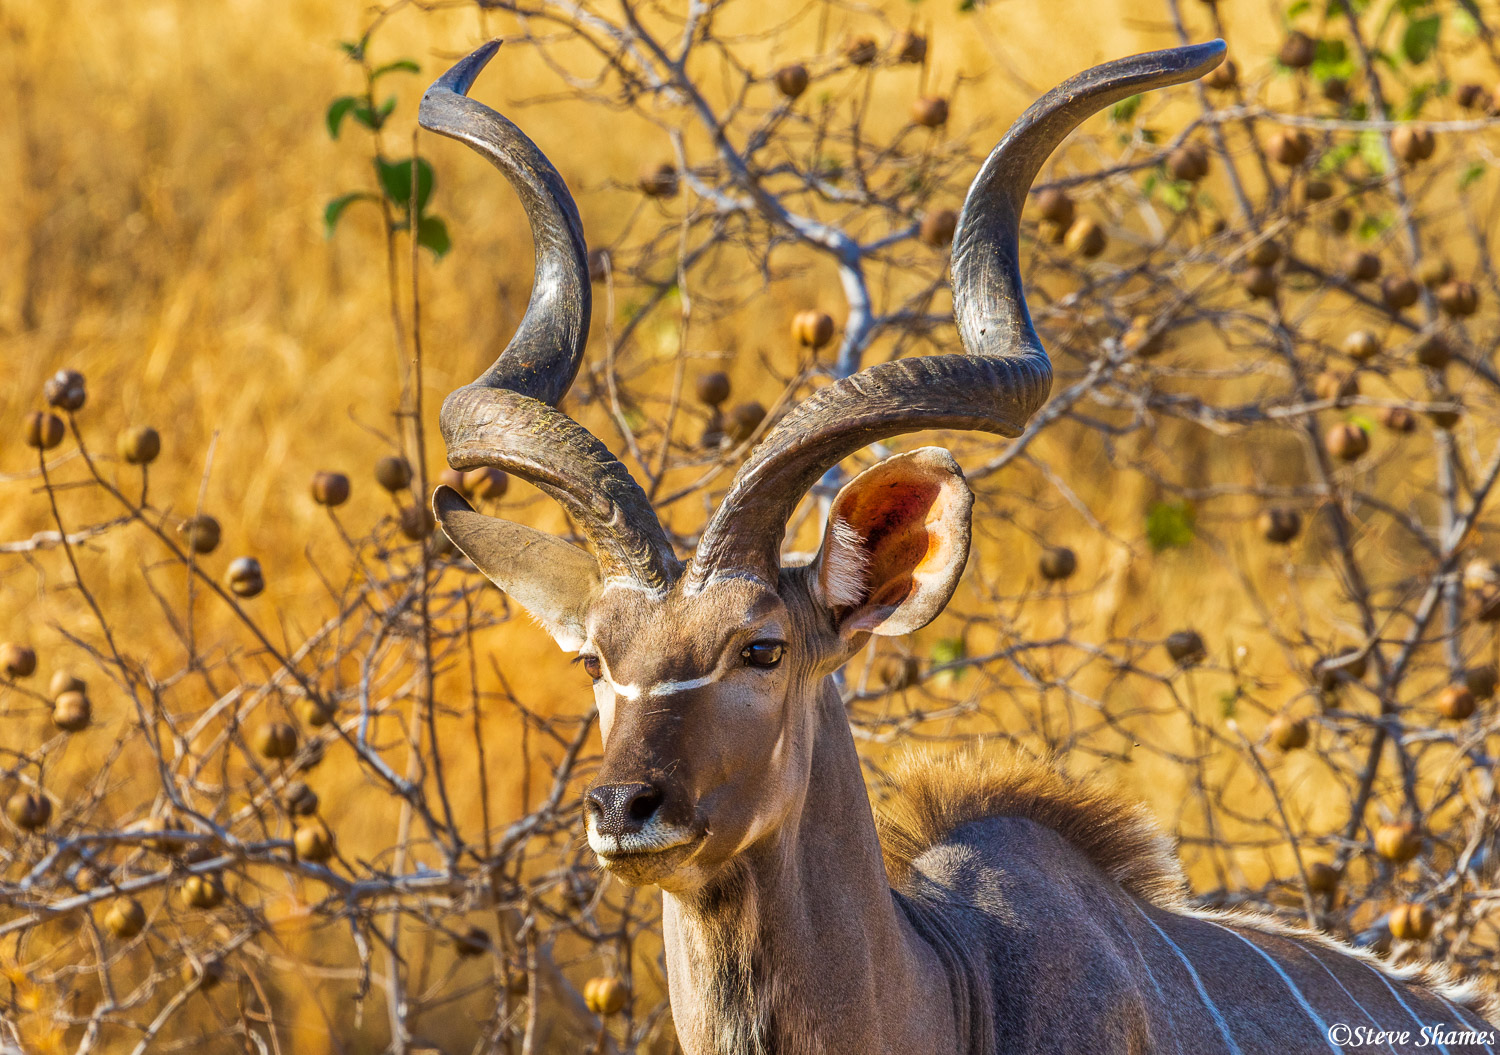 A proud looking male kudu with those beautiful twisting horns.